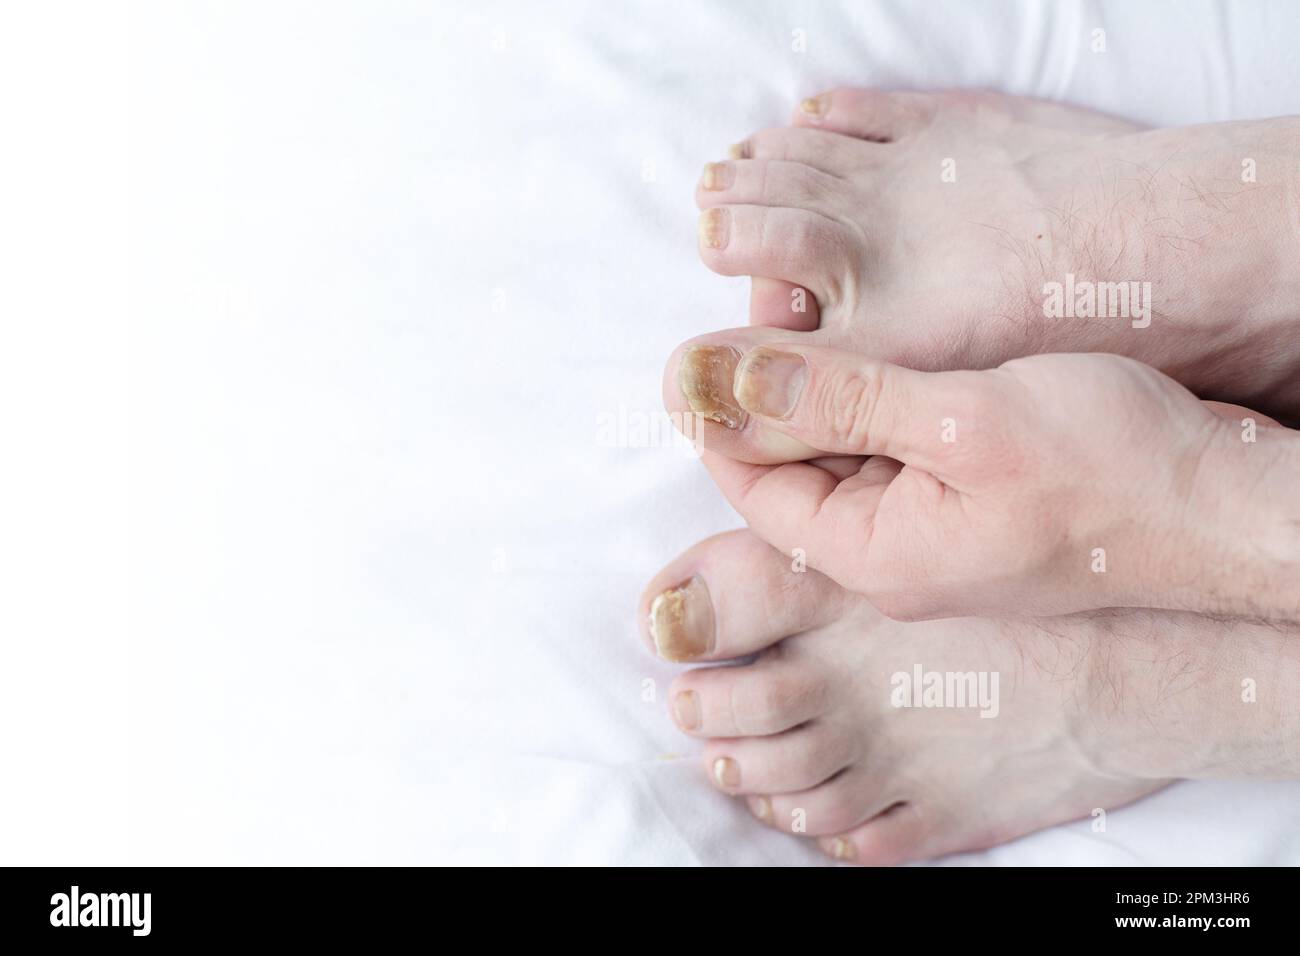 A Baby, Pus, a Nail Grew into a Finger Stock Image - Image of disgusting,  feet: 292678301